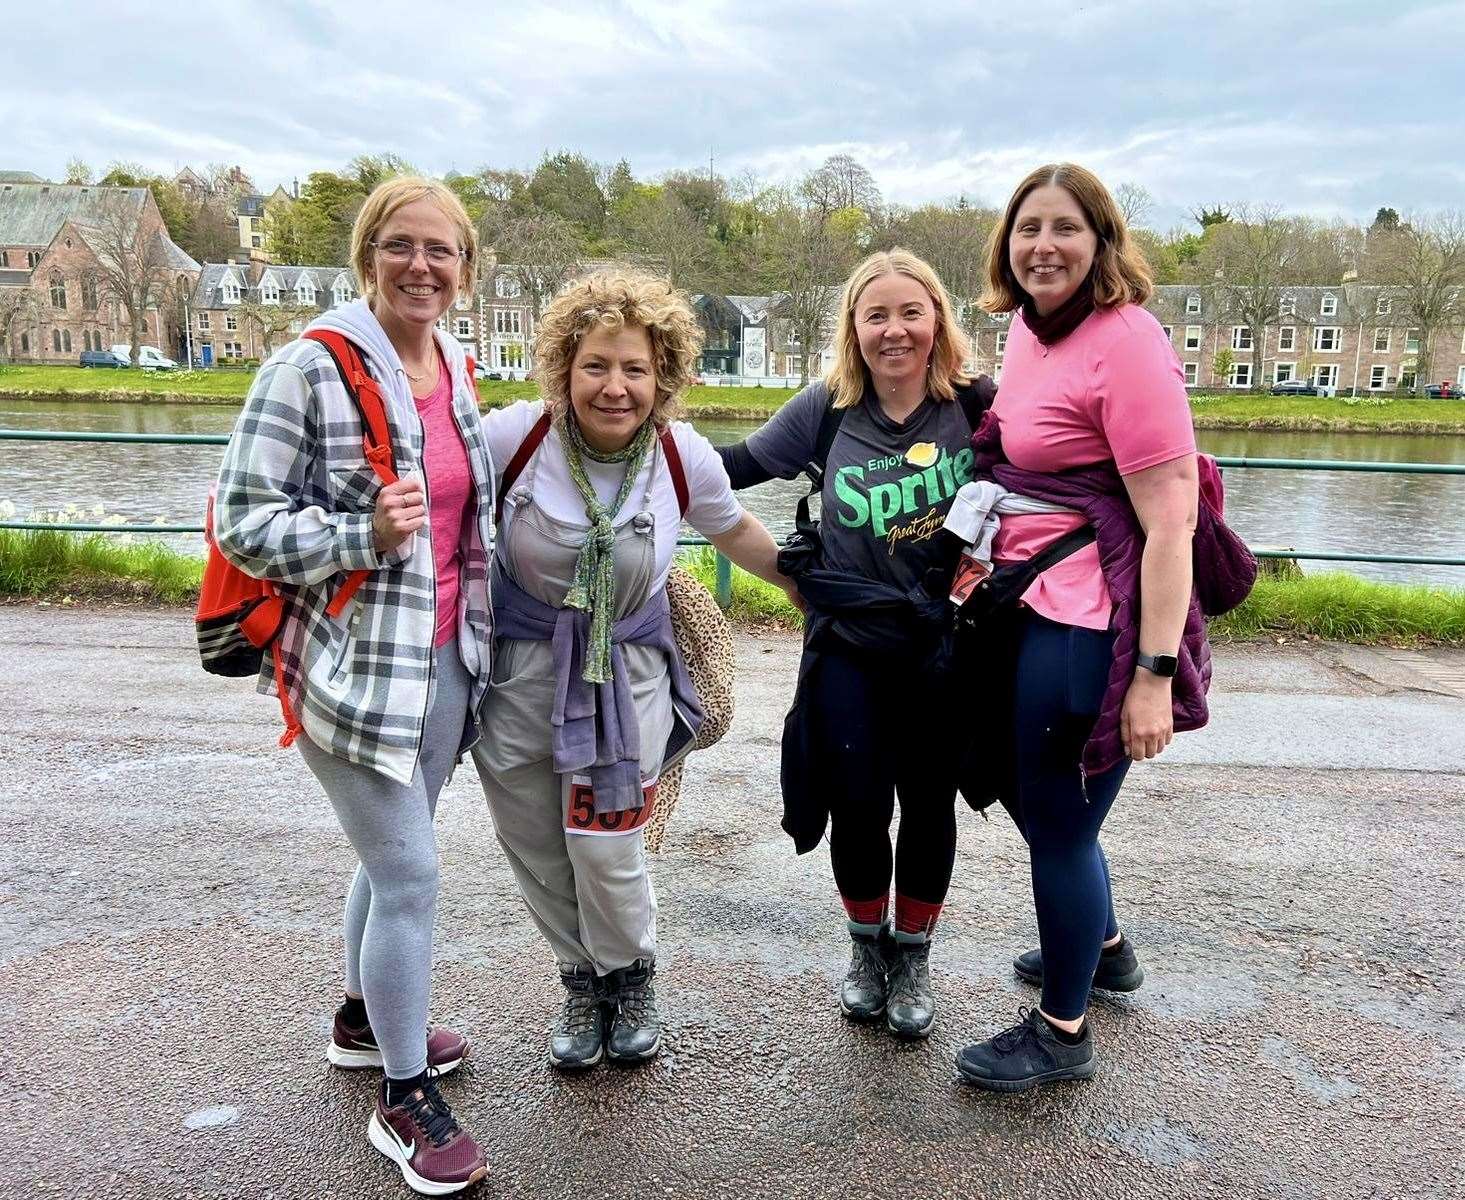 This gang of four ladies – Marion, Neilian, Louise and Tracy – joined dozens of runners and walkers for the Befrienders’ 30th anniversary event.